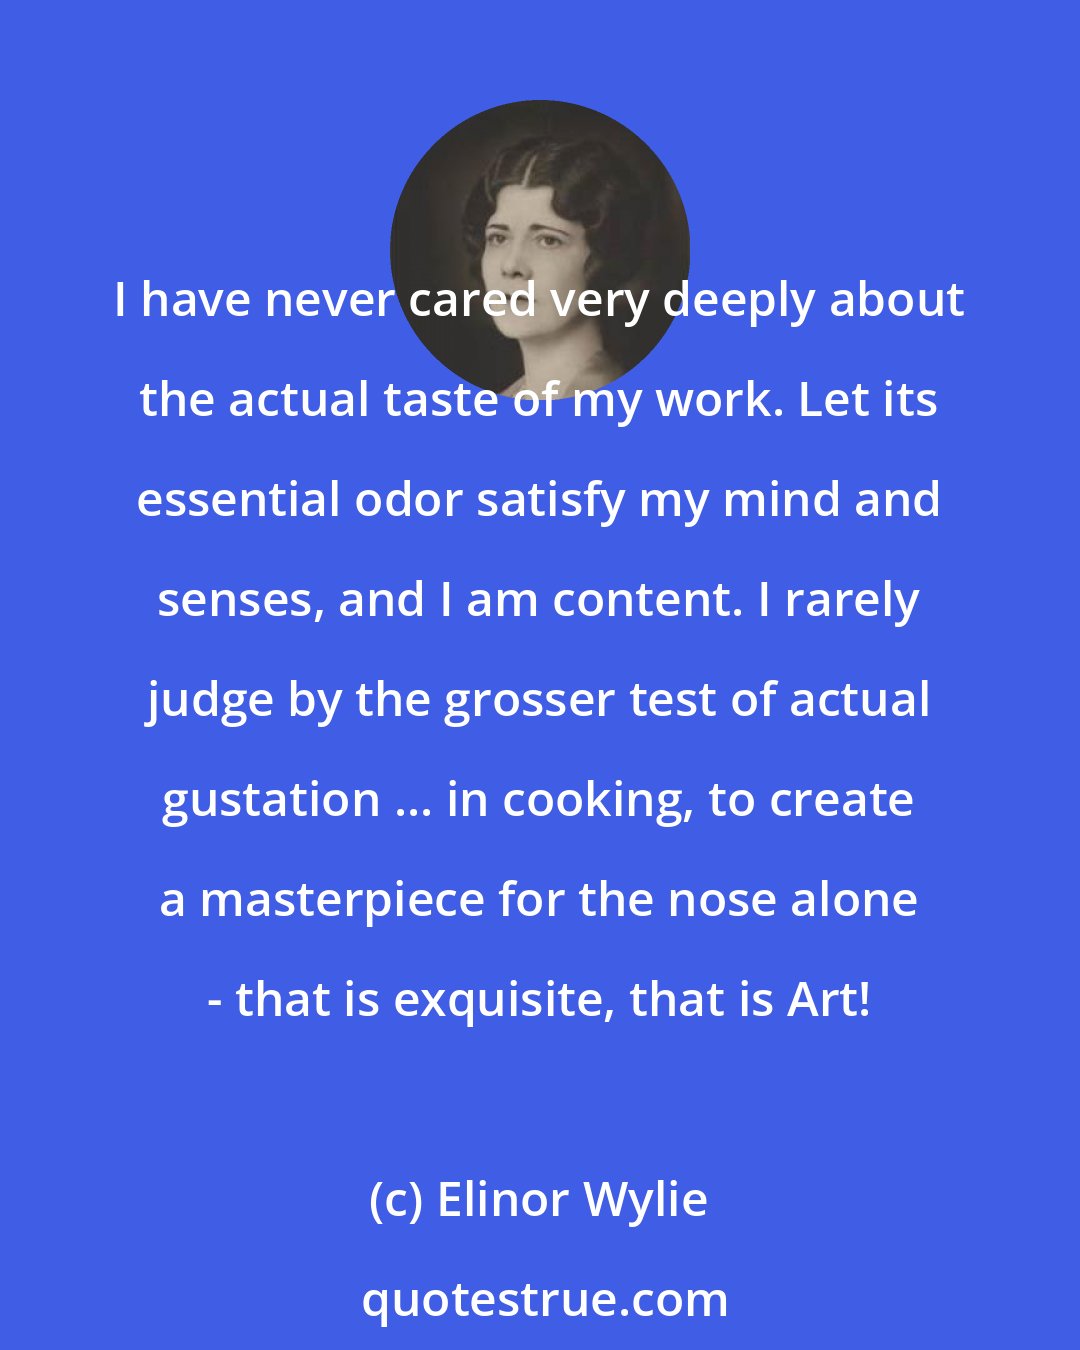 Elinor Wylie: I have never cared very deeply about the actual taste of my work. Let its essential odor satisfy my mind and senses, and I am content. I rarely judge by the grosser test of actual gustation ... in cooking, to create a masterpiece for the nose alone - that is exquisite, that is Art!